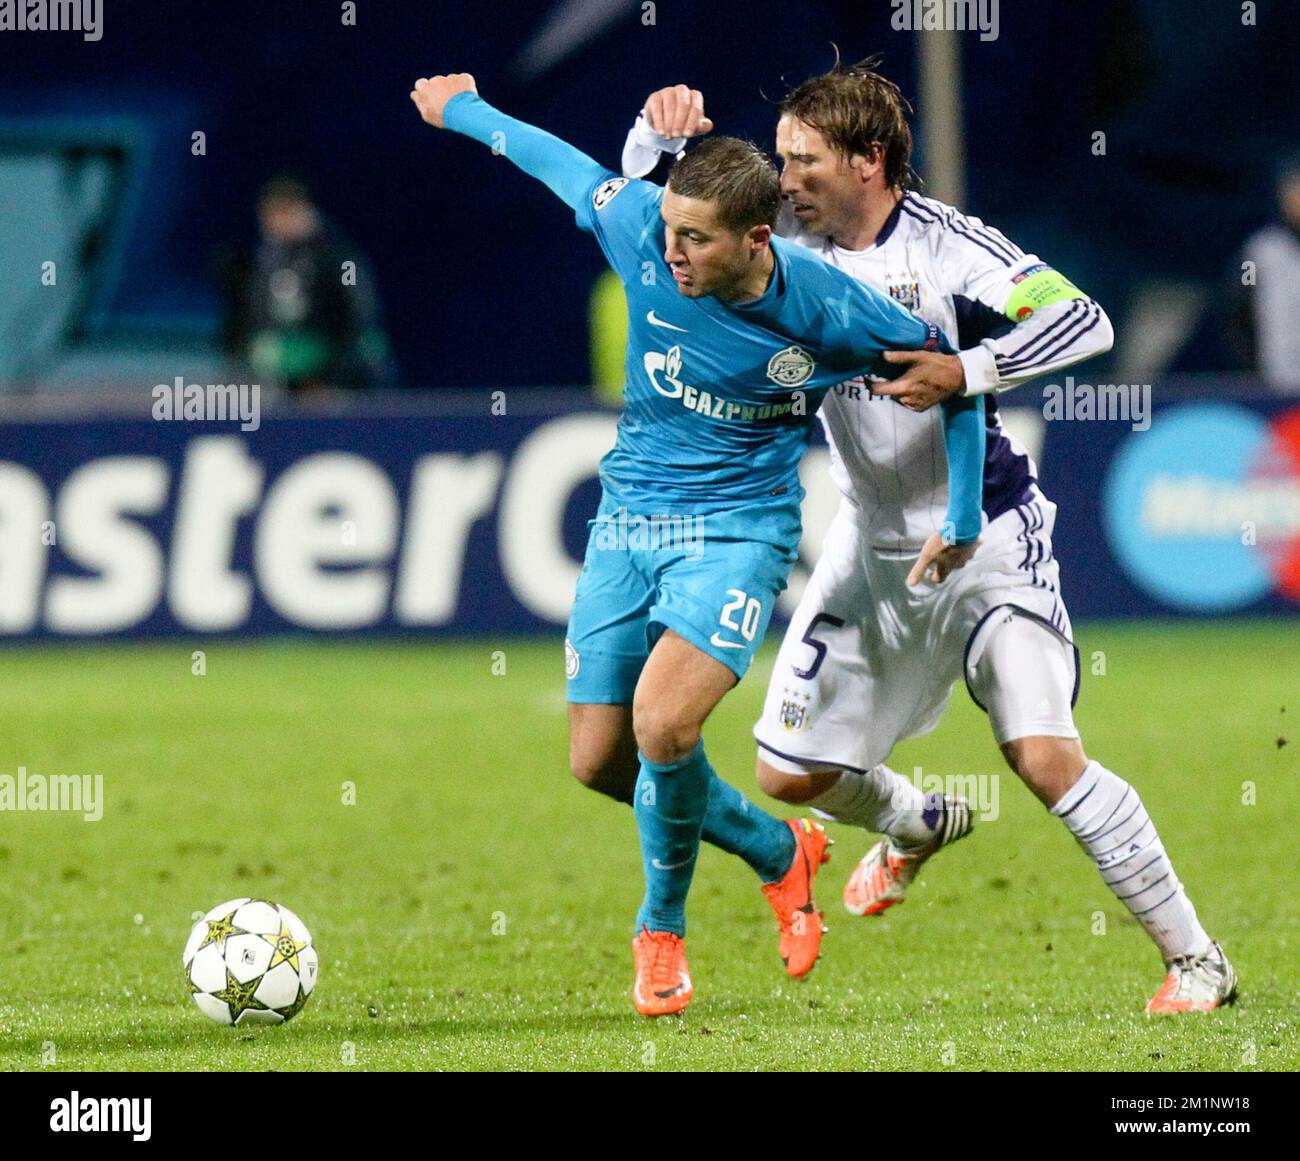 20121024 - SAINT PETERSBURG, RUSSIA: Anderlecht's Lucas Biglia (R) and Zenit's Viktor Fayzulin fight for the ball during the soccer match FC Zenit Saint Petersburg vs Belgian first division soccer team RSC Anderlecht, in group C of the UEFA Champions League tournament, Wednesday 24 October 2012 in Saint Petersburg, Russia. BELGA PHOTO VIRGINIE LEFOUR Stock Photo